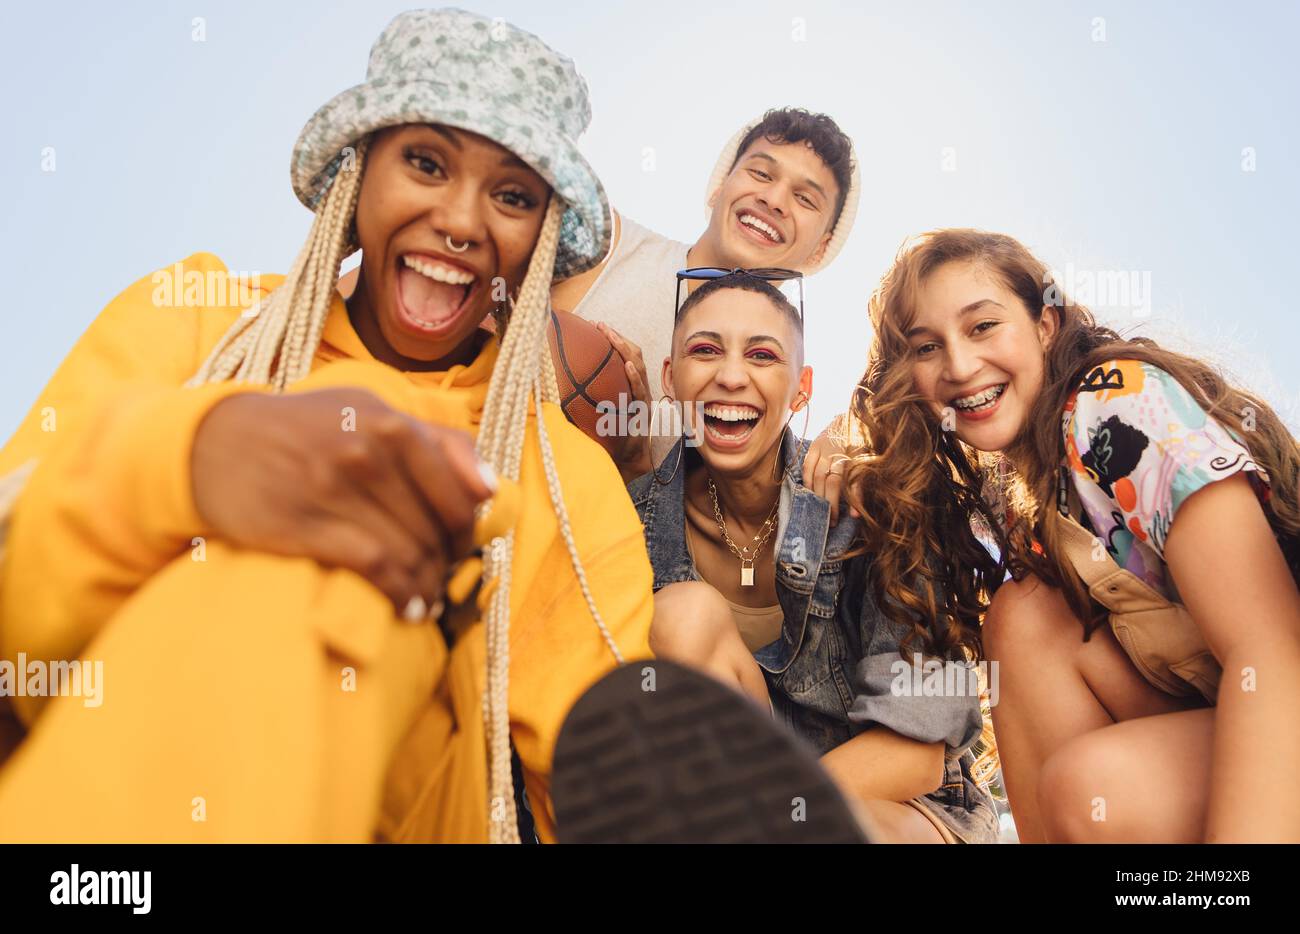 Cheerful generation z friends having fun together outdoors. Group of multiethnic friends smiling at the camera cheerfully. Vibrant young people making Stock Photo